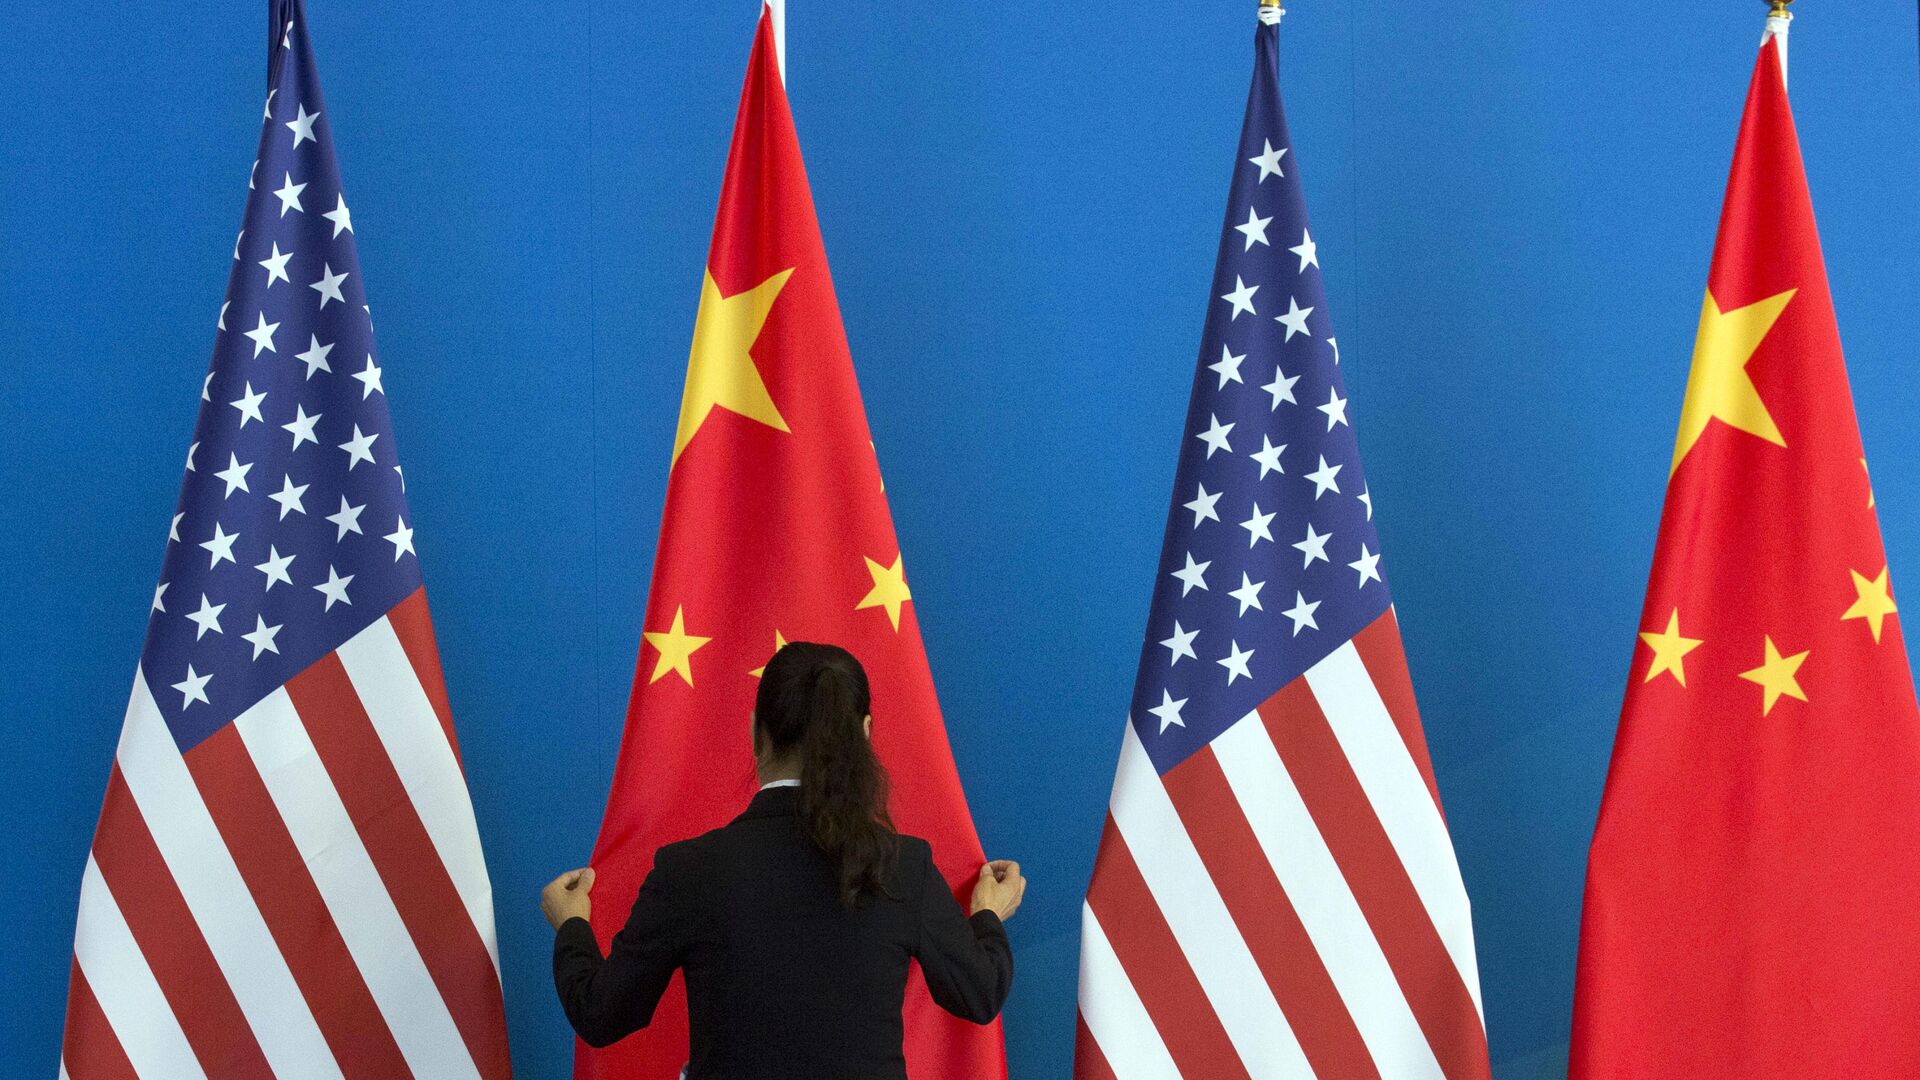 A Chinese woman adjusts the Chinese national flag near U.S. national flags before a Strategic Dialogue expanded meeting that's part of the U.S.-China Strategic and Economic Dialogue at the Diaoyutai State Guesthouse in Beijing, Thursday, July 10, 2014 - Sputnik International, 1920, 22.02.2021